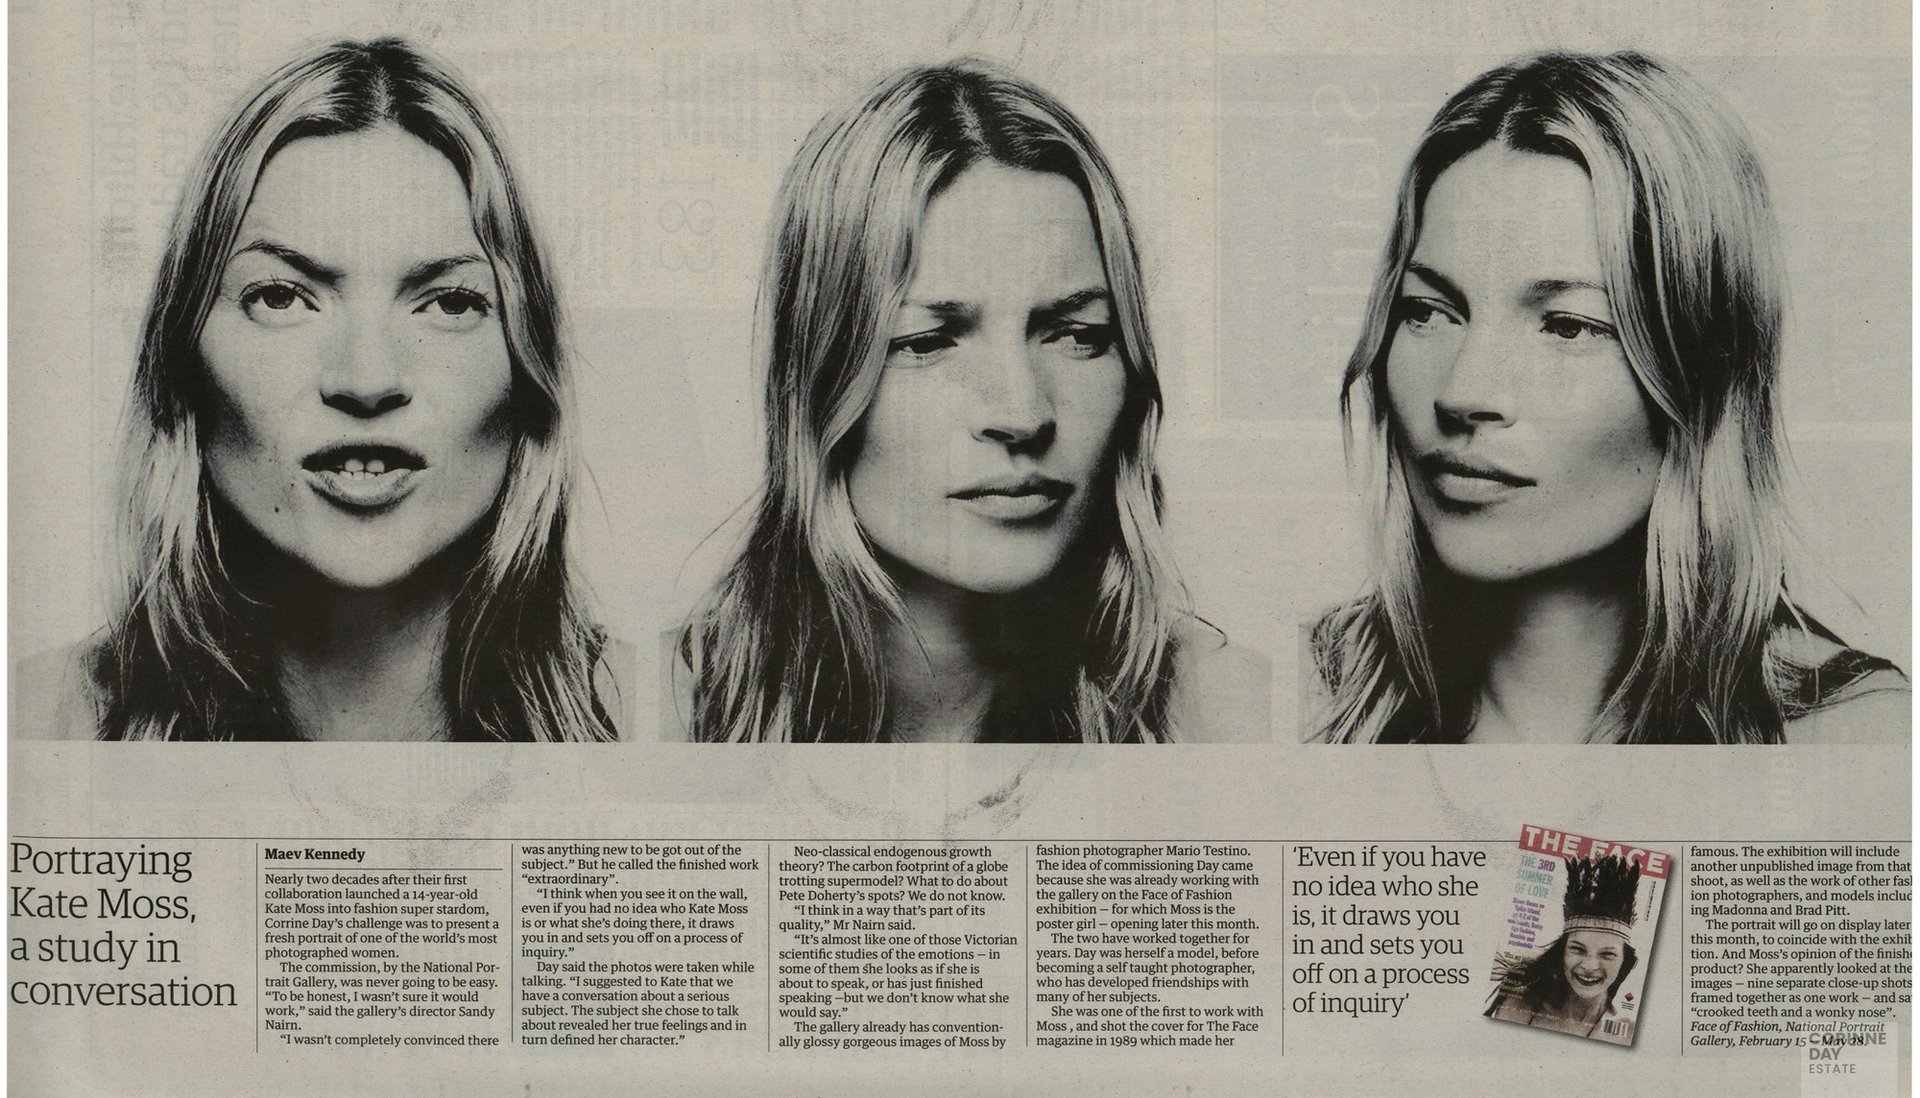 Eyewitness National Portrait Gallery Portraying Kate Moss, a study in conversation, The Guardian, 5 Feb 2007 — Image 1 of 1